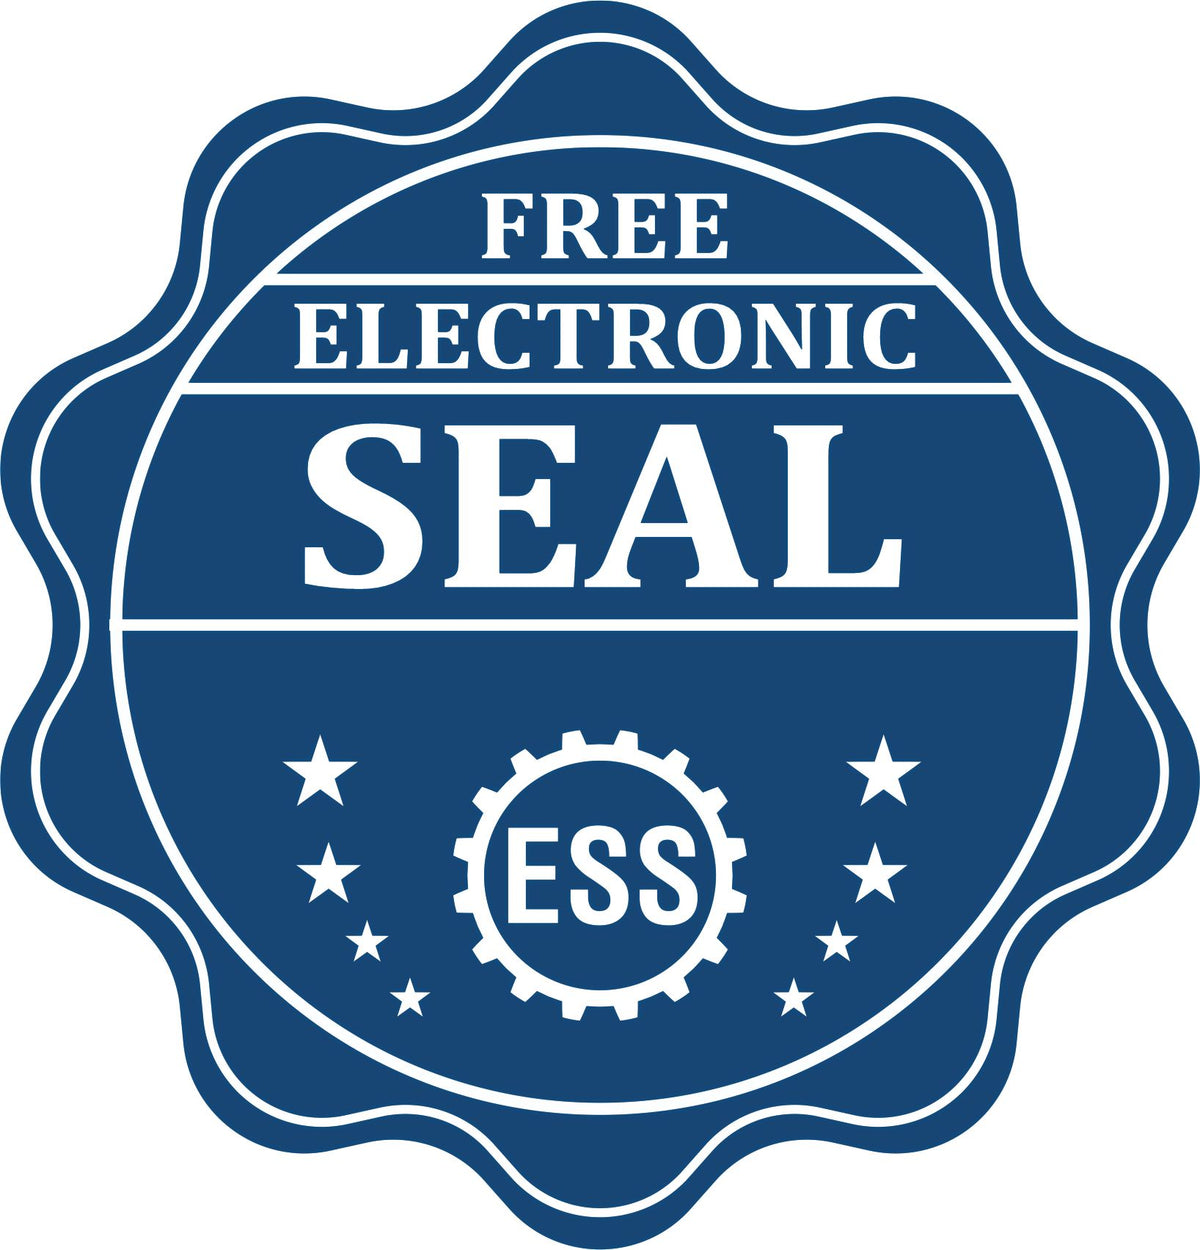 A badge showing a free electronic seal for the Soft Utah Professional Engineer Seal with stars and the ESS gear on the emblem.